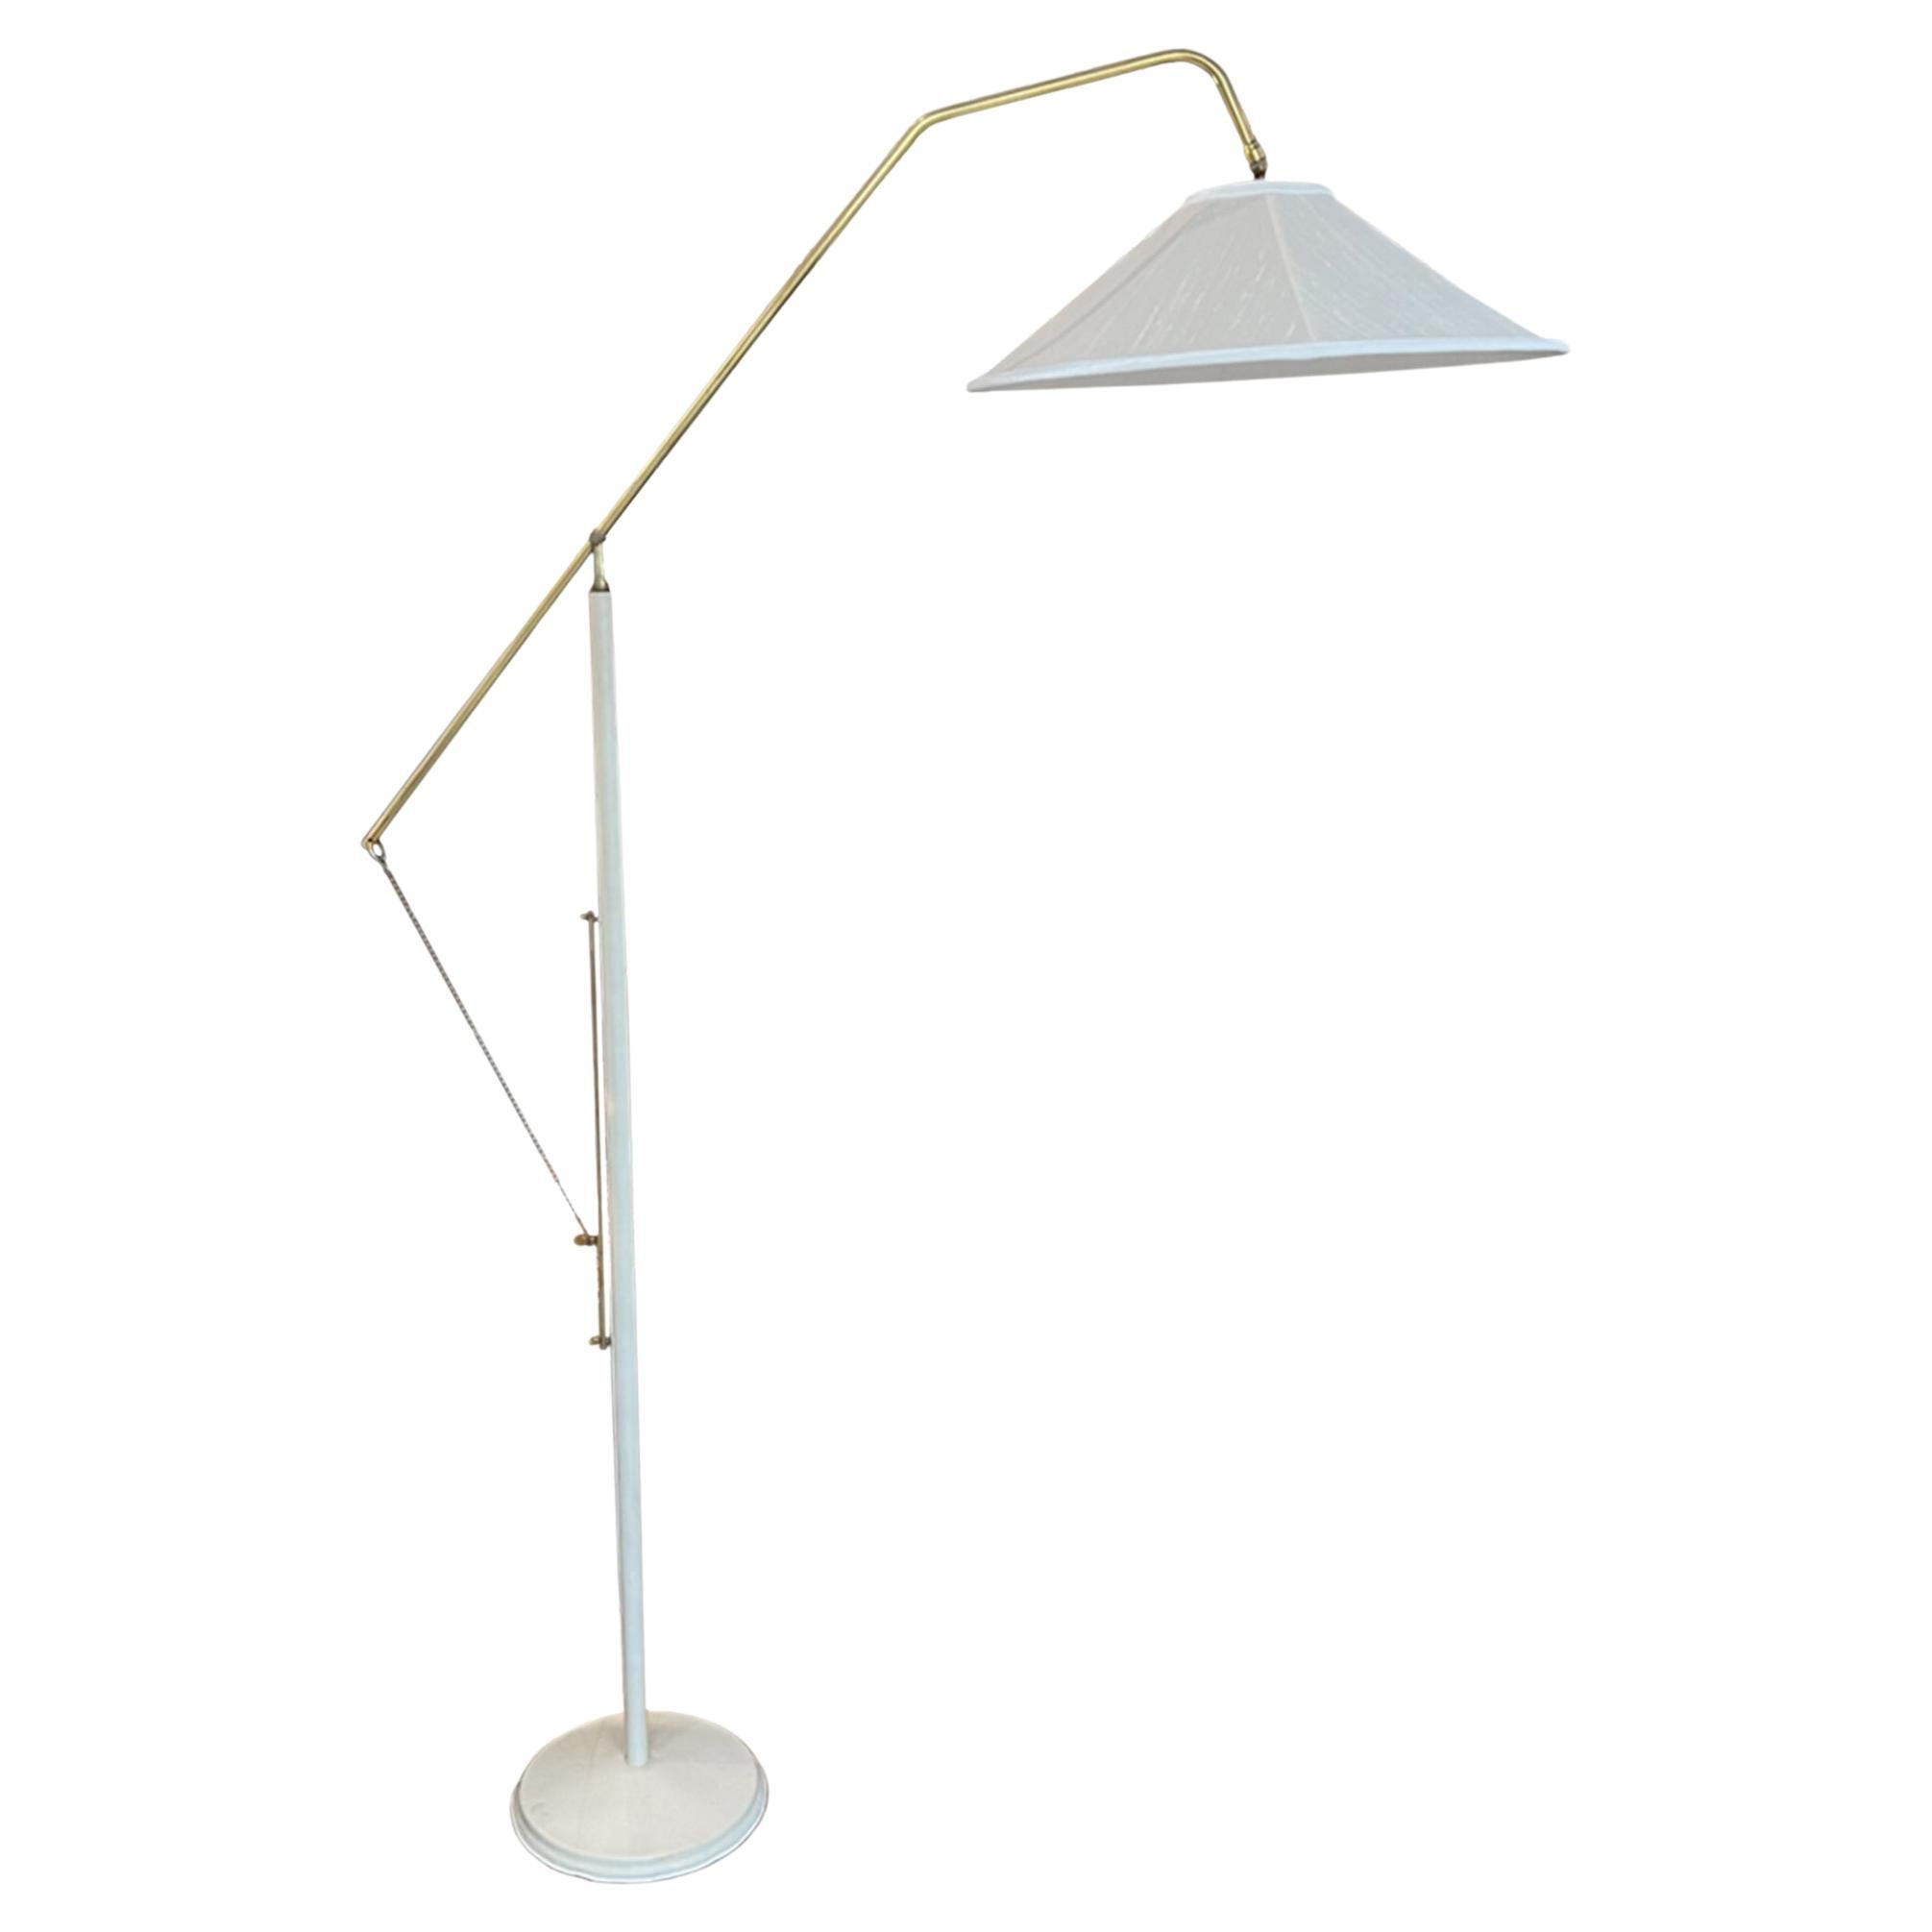 Elegant French 1970s Floor Lamp With Cream Leather Trim And Base For Sale